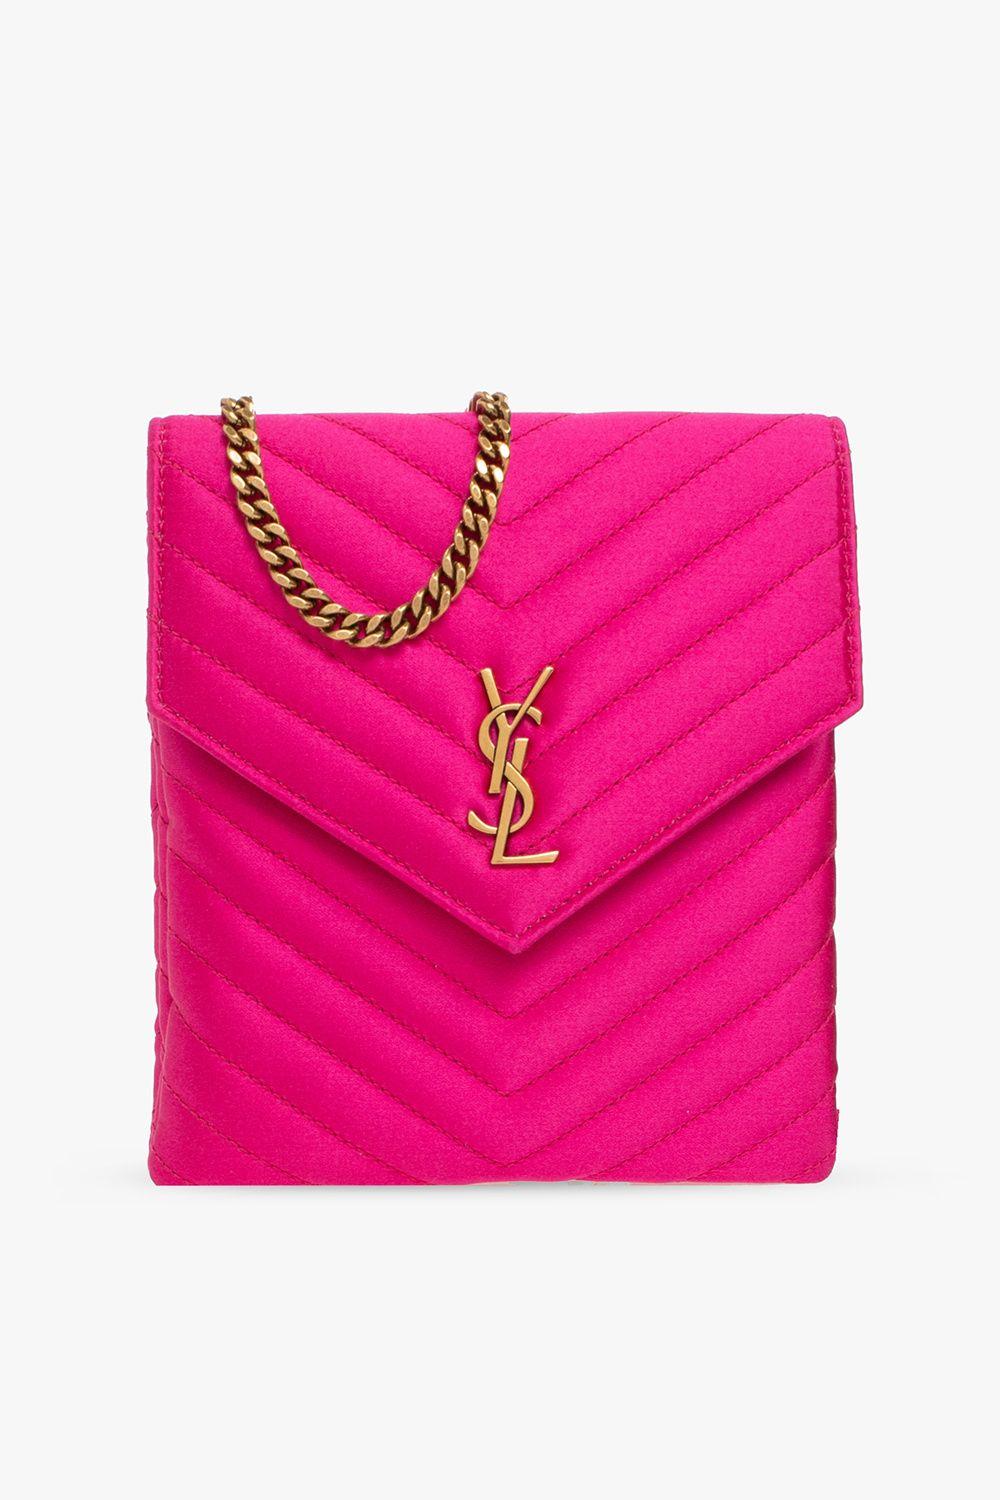 Sandy's Cakes on Instagram: “A baby pink YSL handbag for Abbey's 21st.” |  Ysl handbags, Purse cake, Baby pink